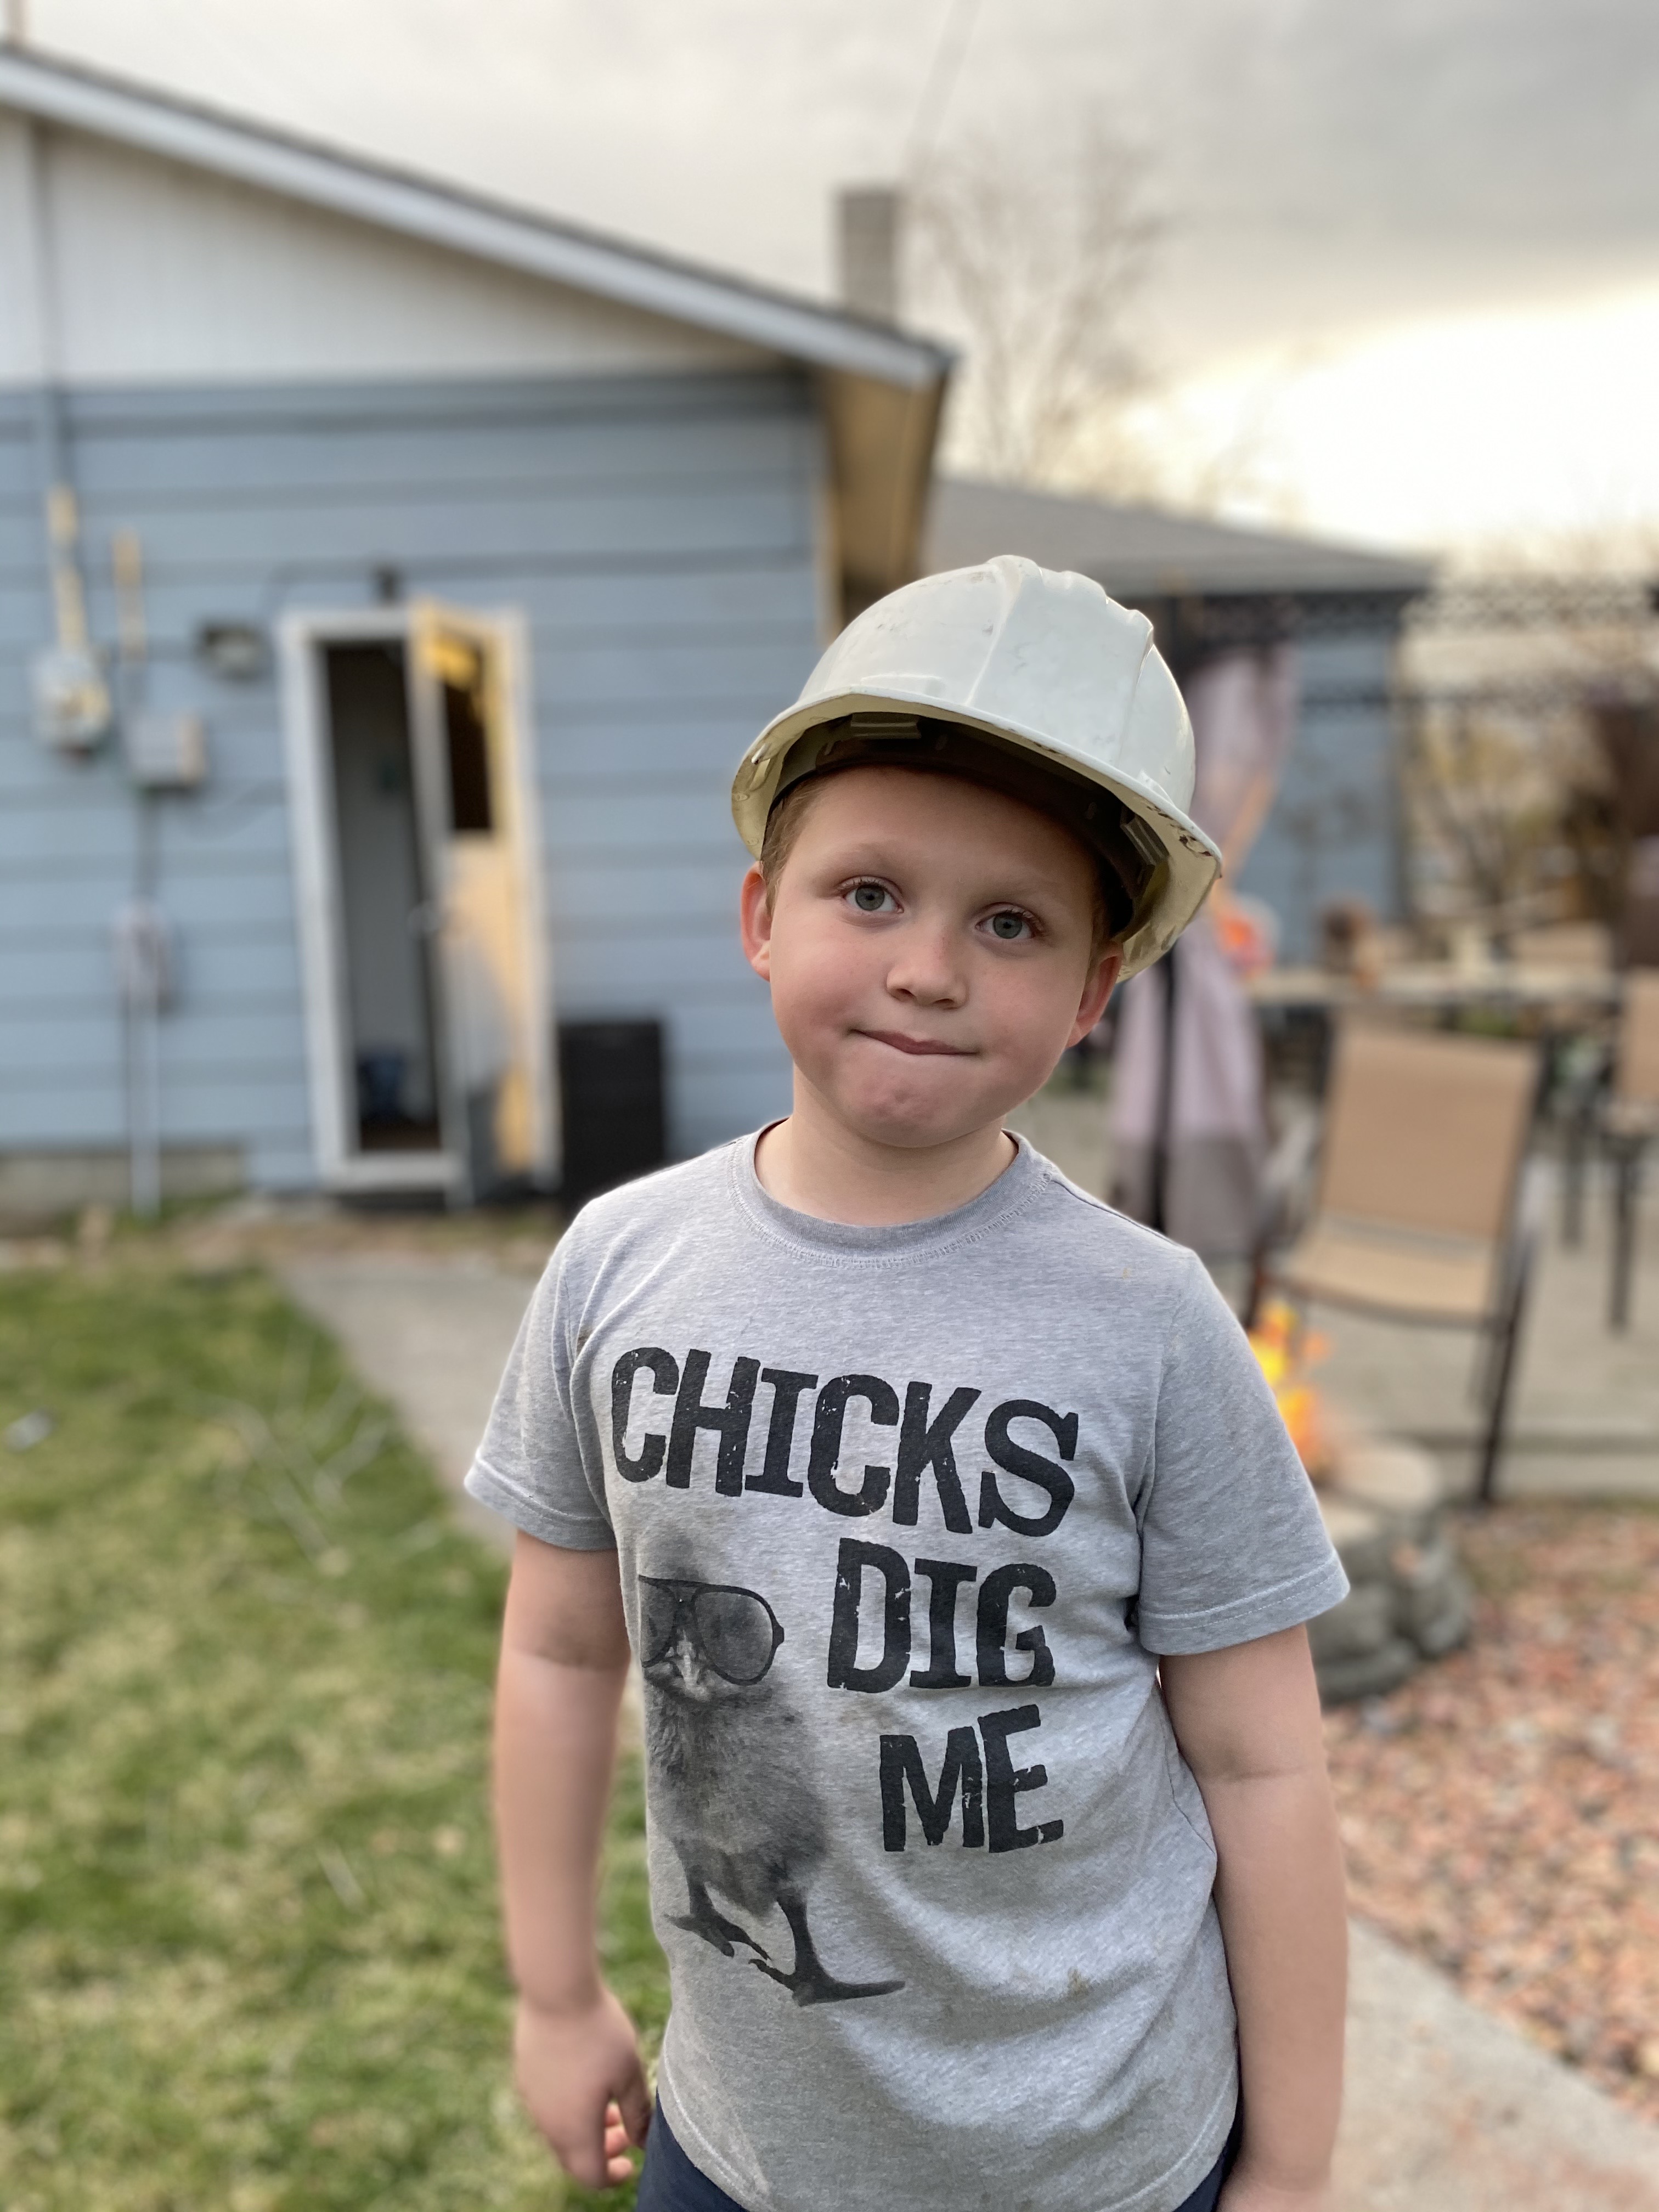 Mateo in a construction hat